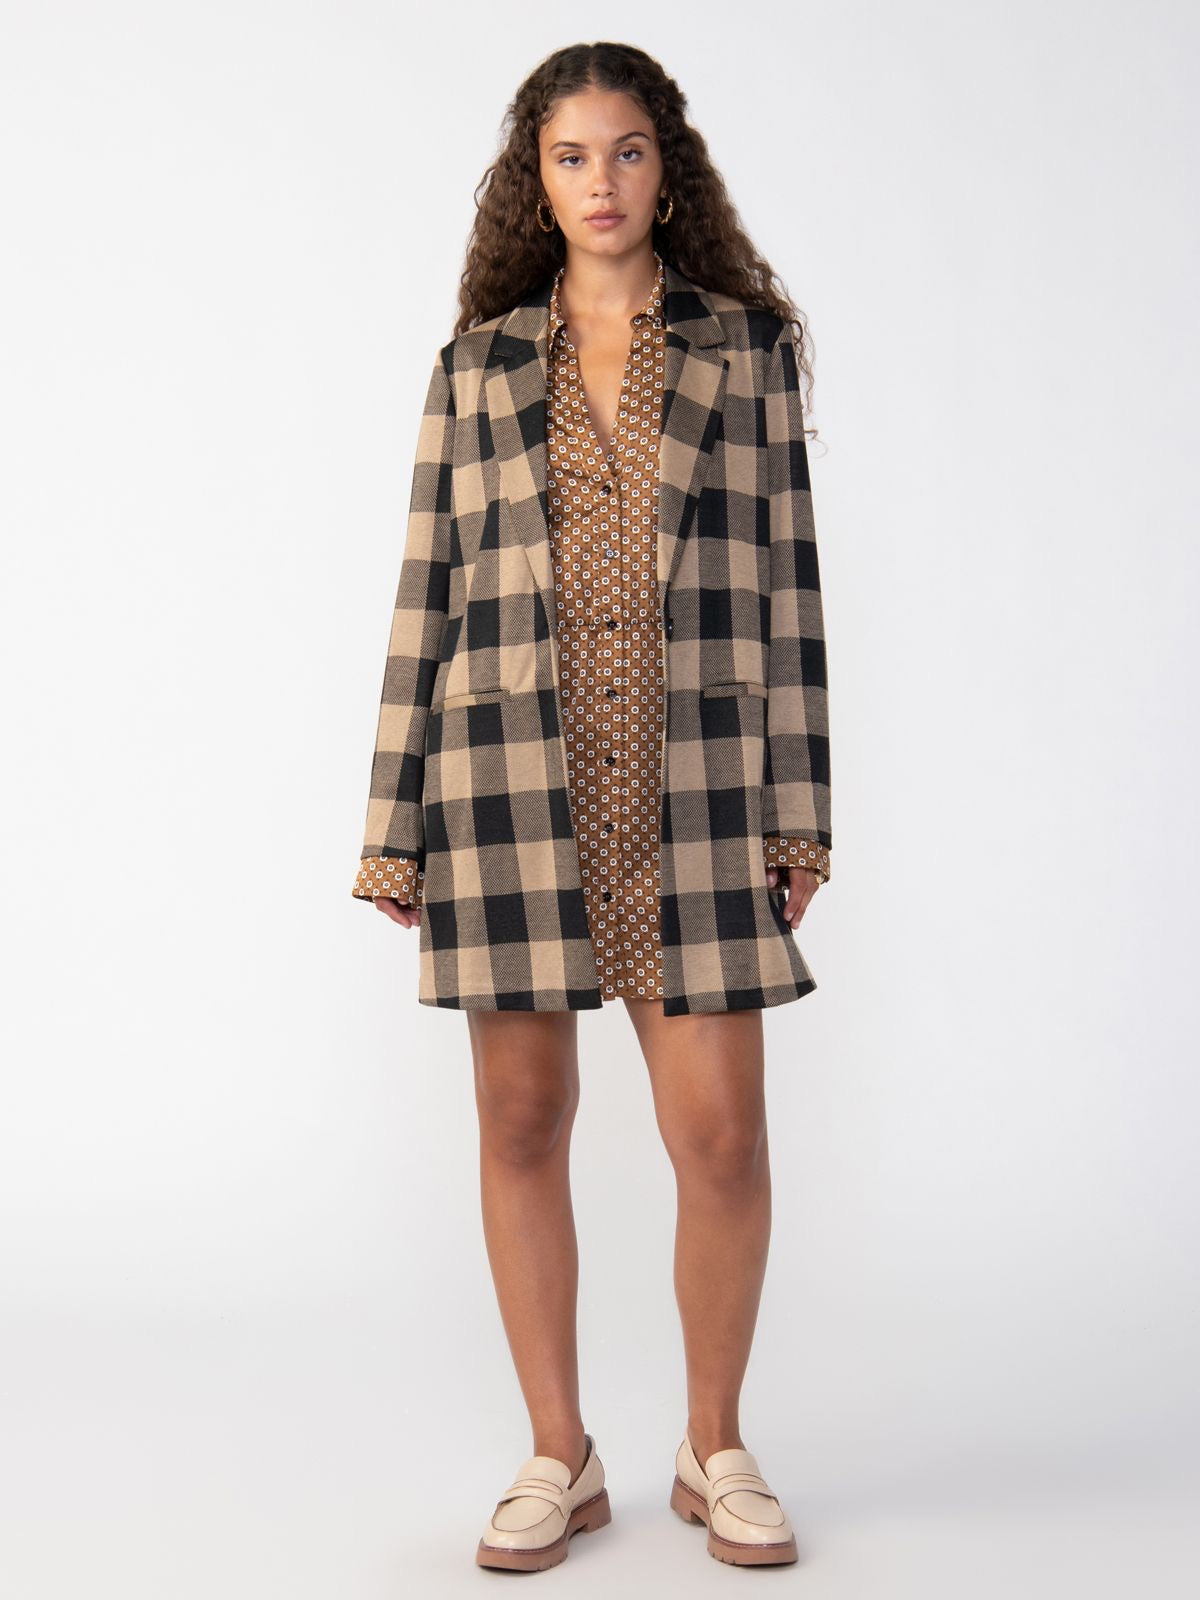 CARLY COAT-CONNOR PLAID